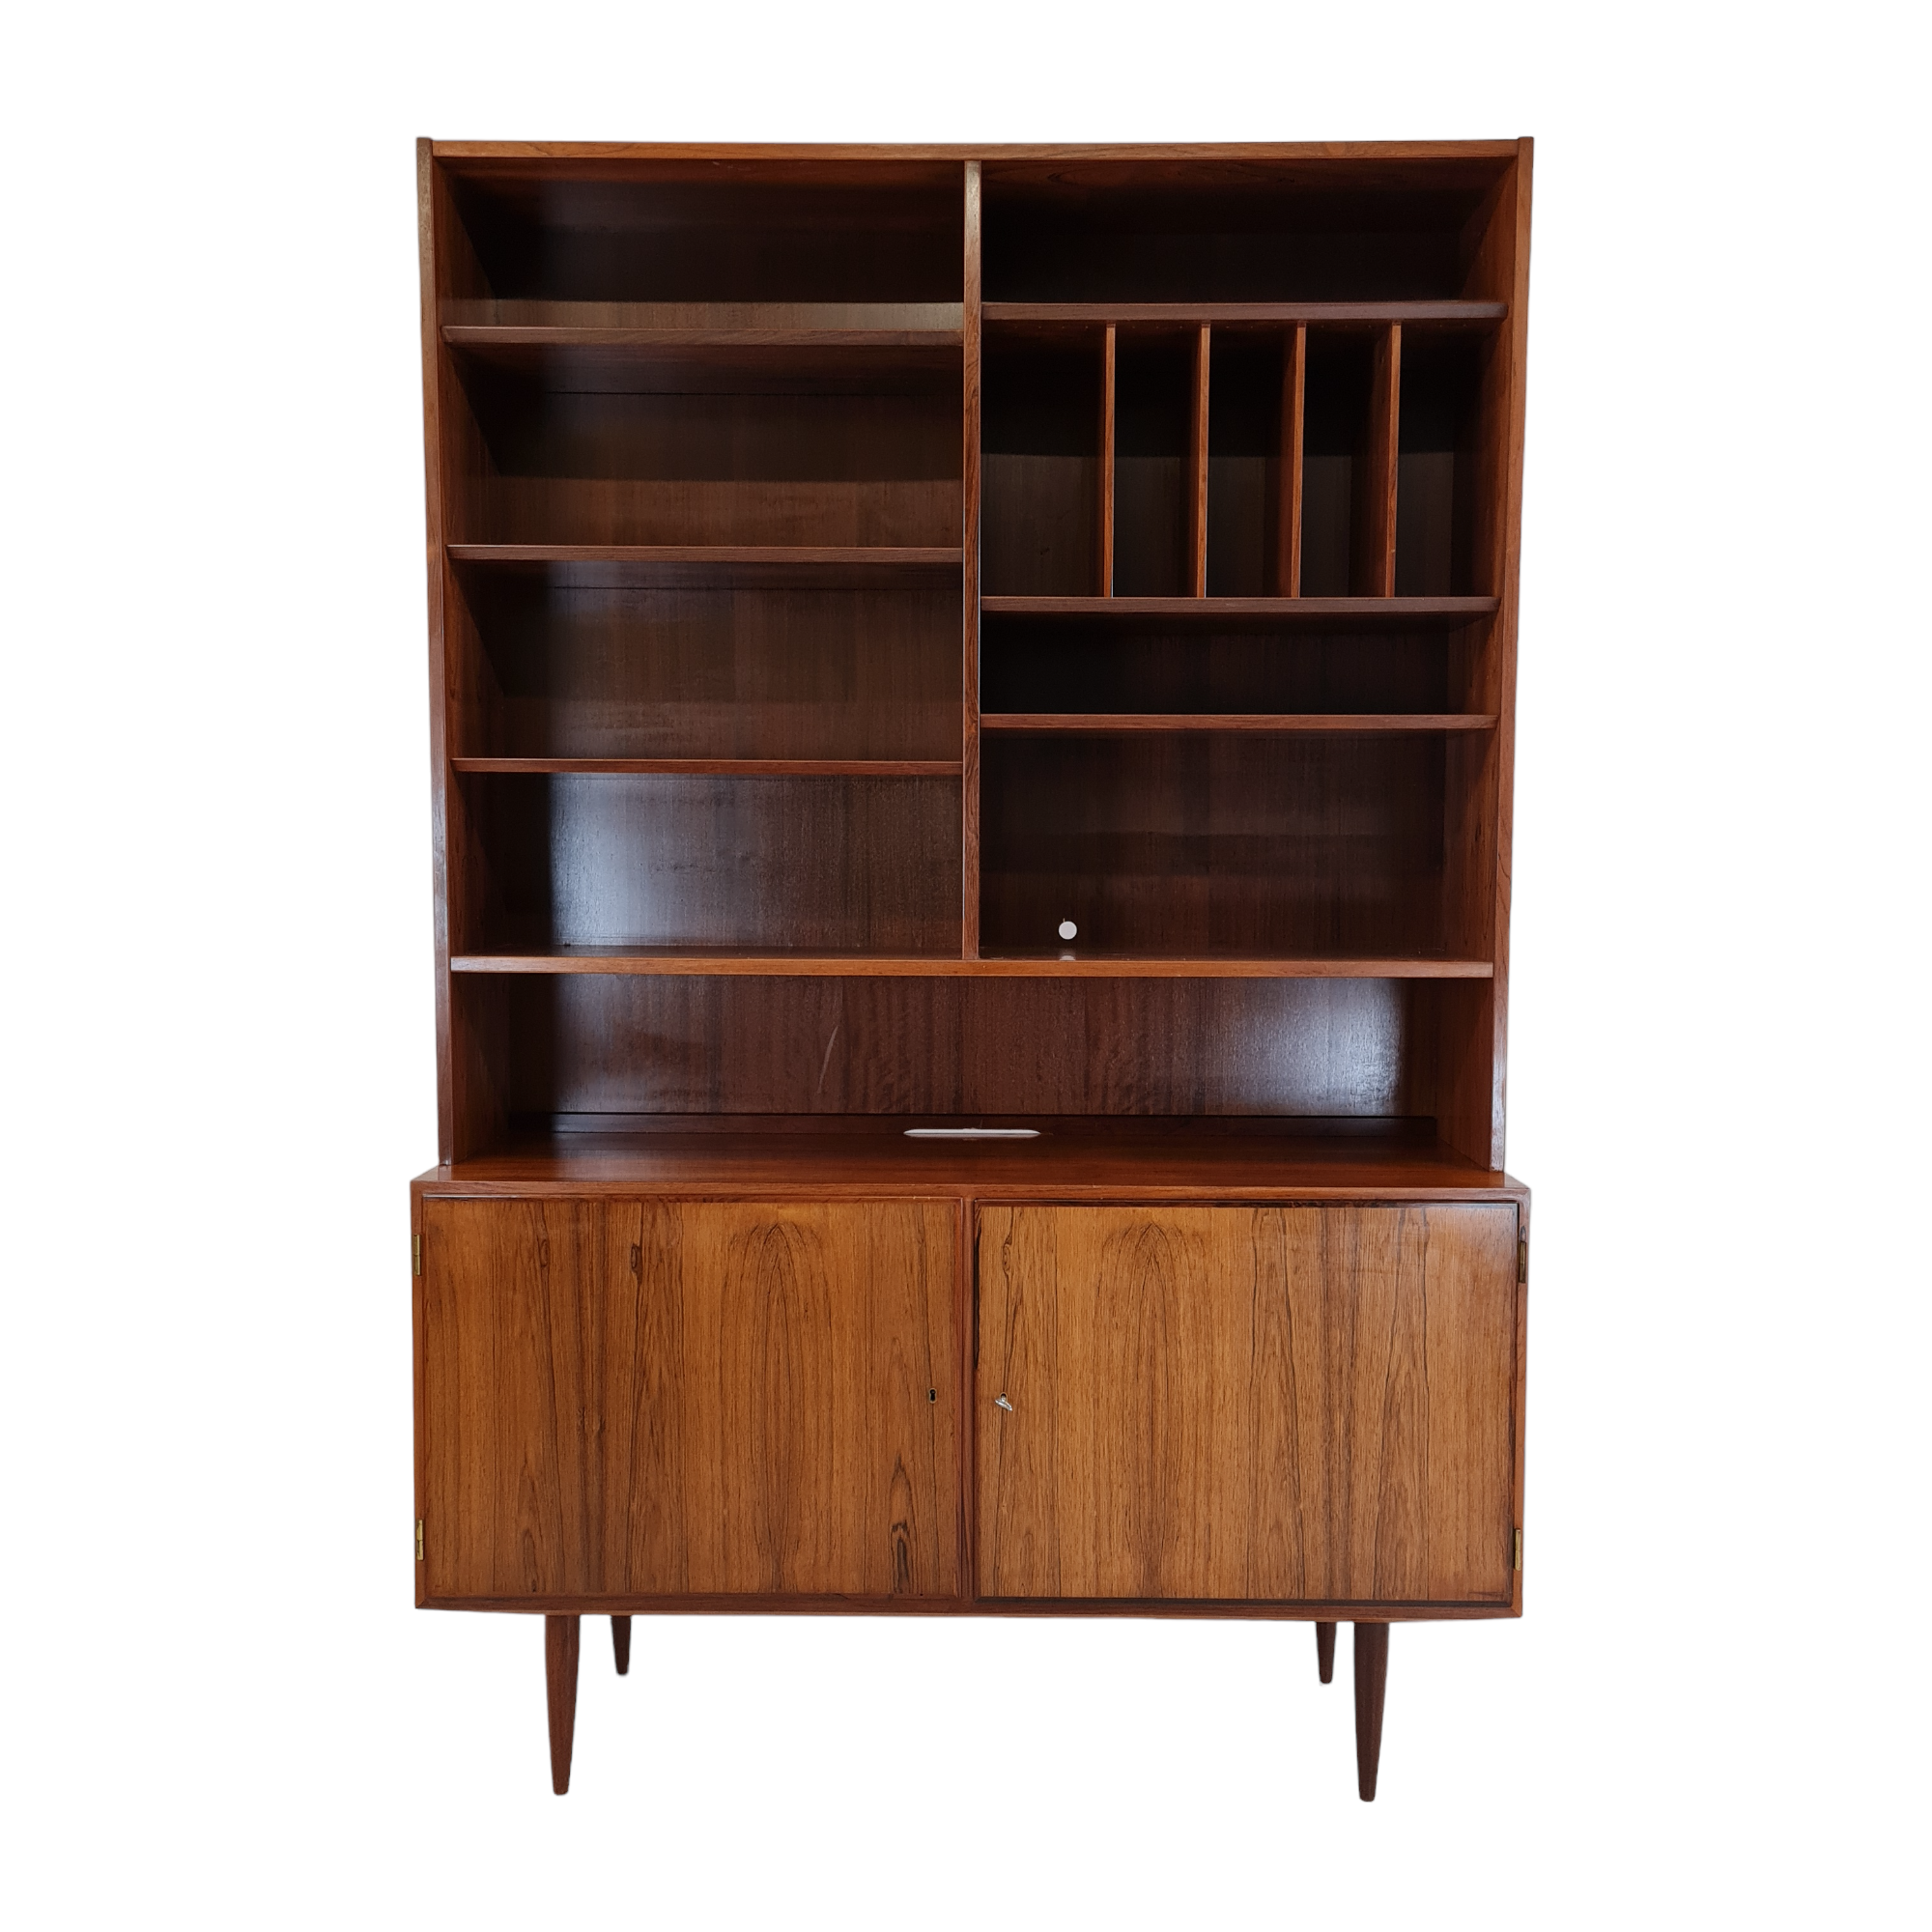 Shelving system with cabinet and bookcase as well as LP shelves | Carlo Jensen | Aage hundevad Furniture | Rosewood